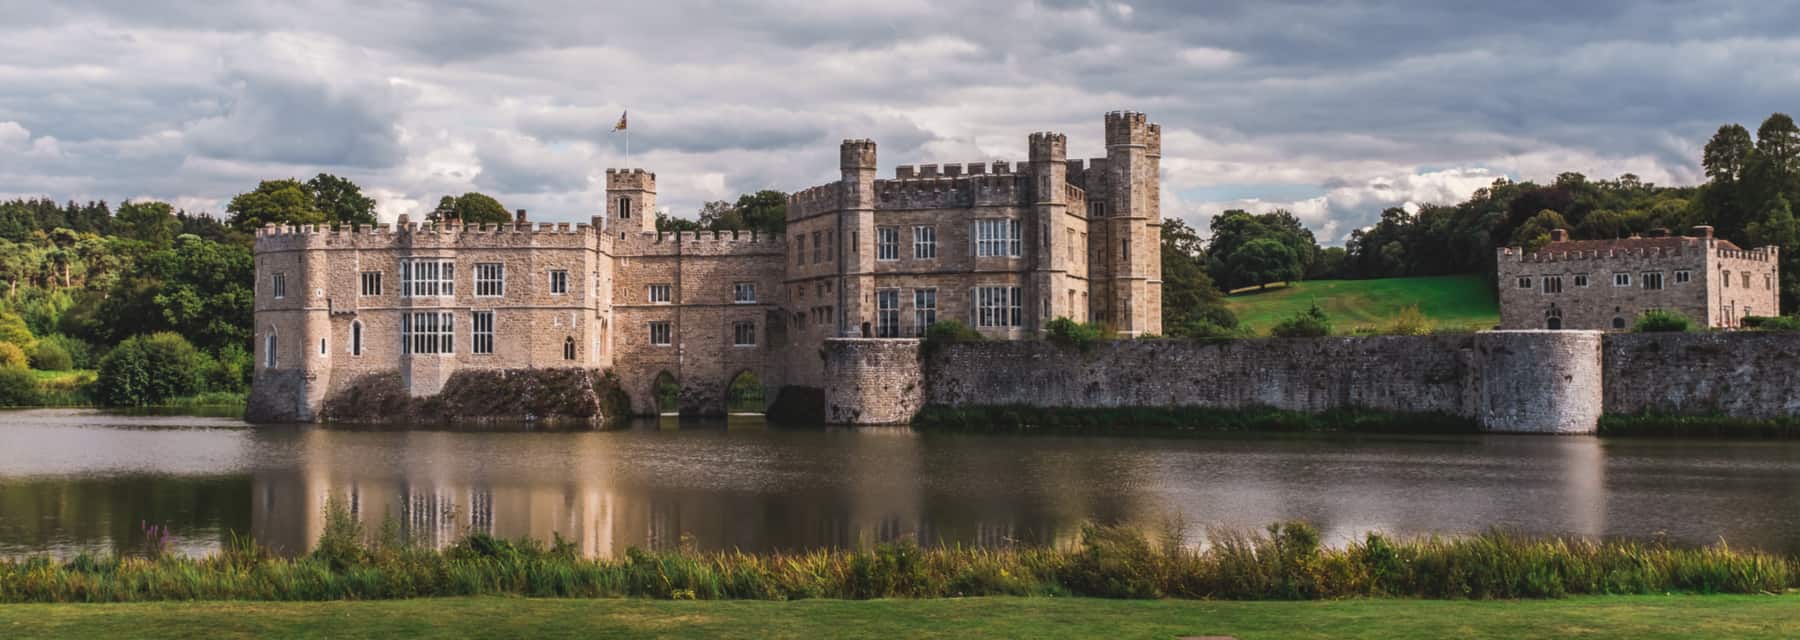 leeds castle exterior and moat